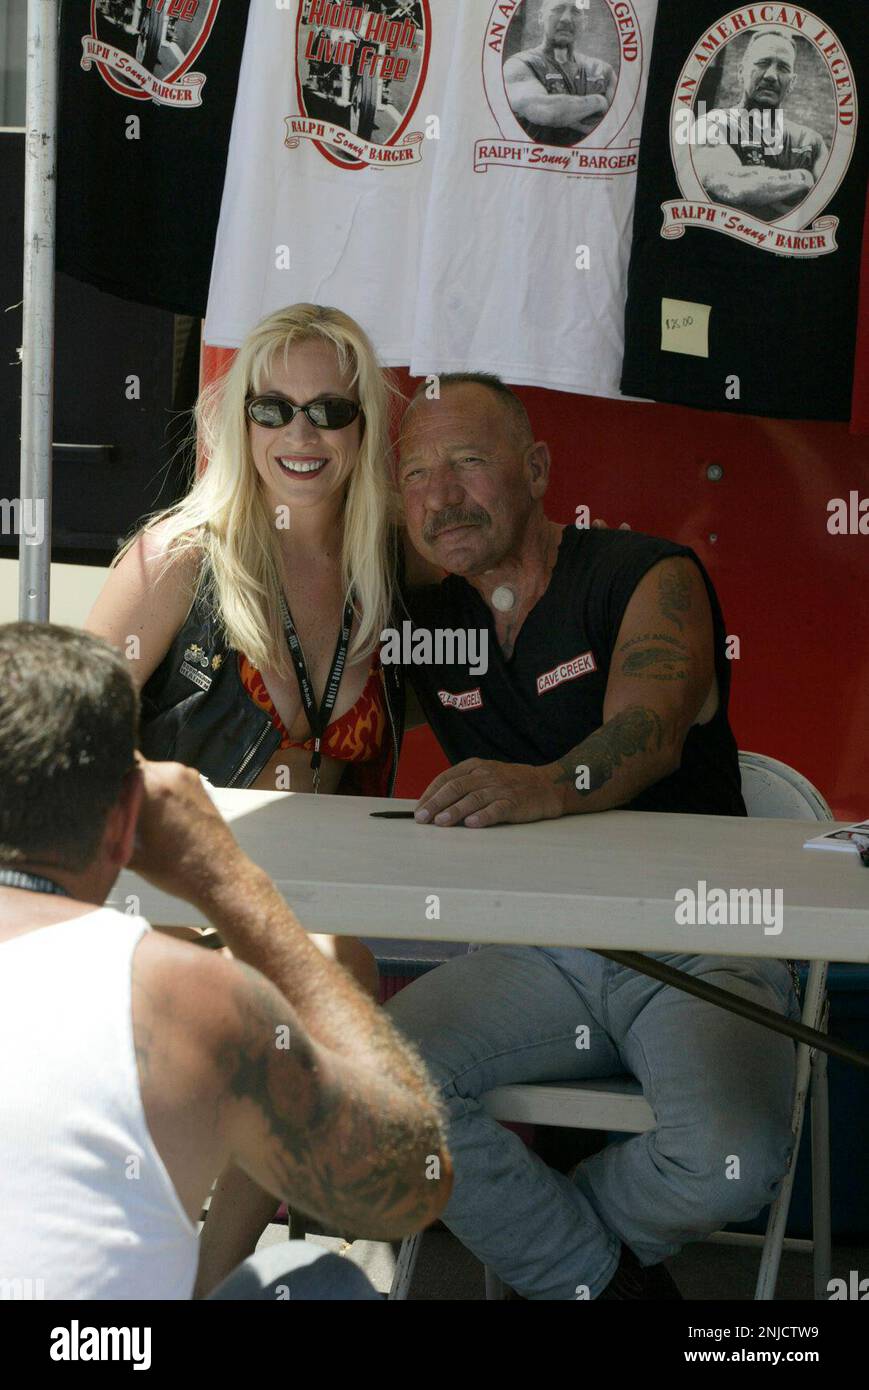 HOLLISTER6-C-05JUL02-PZ-LH--Ralph "Sonny" Barger, founder of the Oakland Chapter of the Hells Angels, taking a picture with Valerie Morrison of San Bernardino during his book signing in the parking lot of Corbin Motors. (PHOTOGRAPHED BY LIZ HAFALIA/THE SAN FRANCISCO CHRONICLE) (LIZ HAFALIA/San Francisco Chronicle via AP) Stock Photo